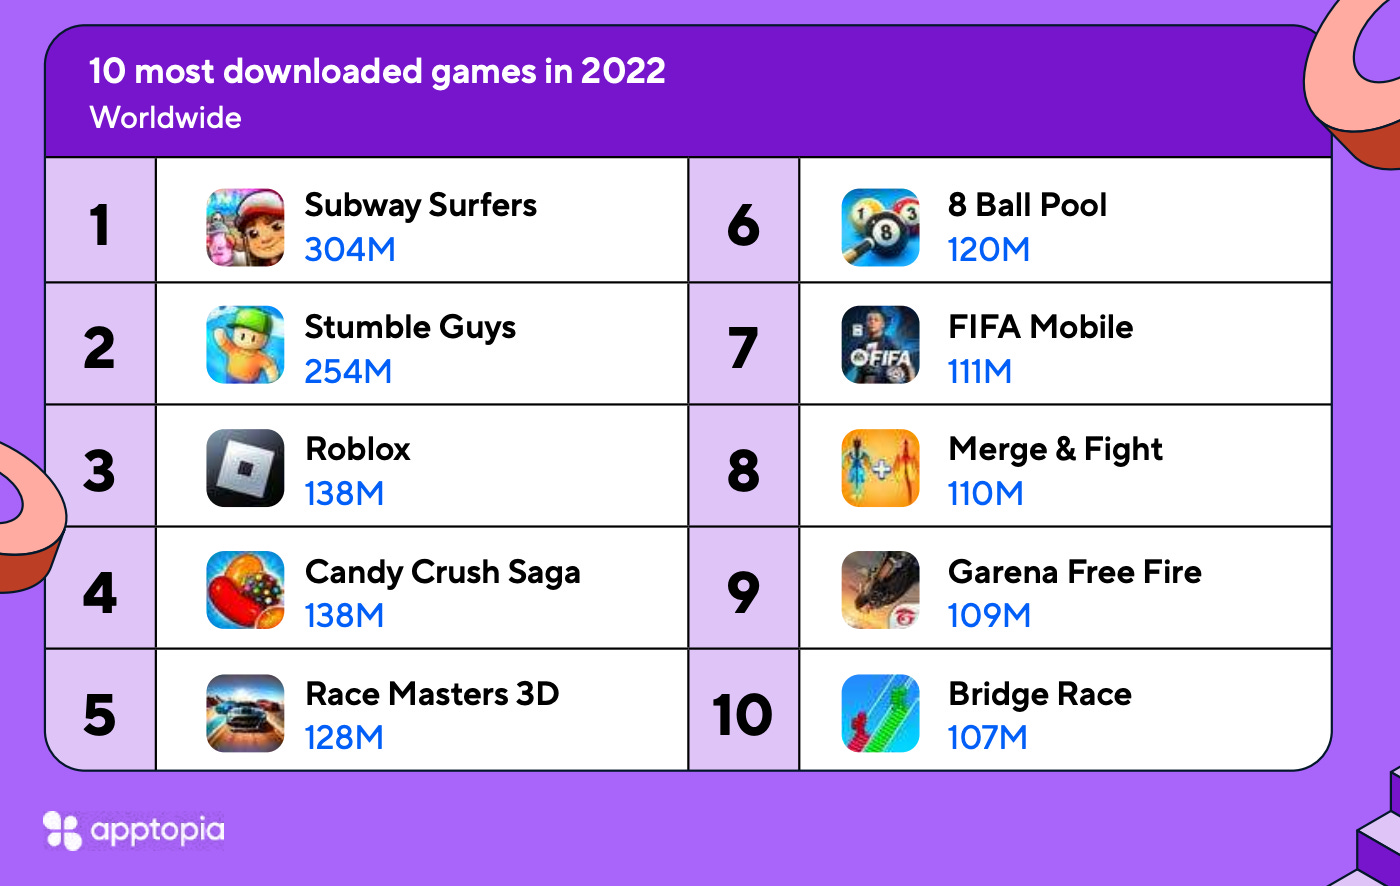 80% of  Gaming's esports content in 2022 was for mobile